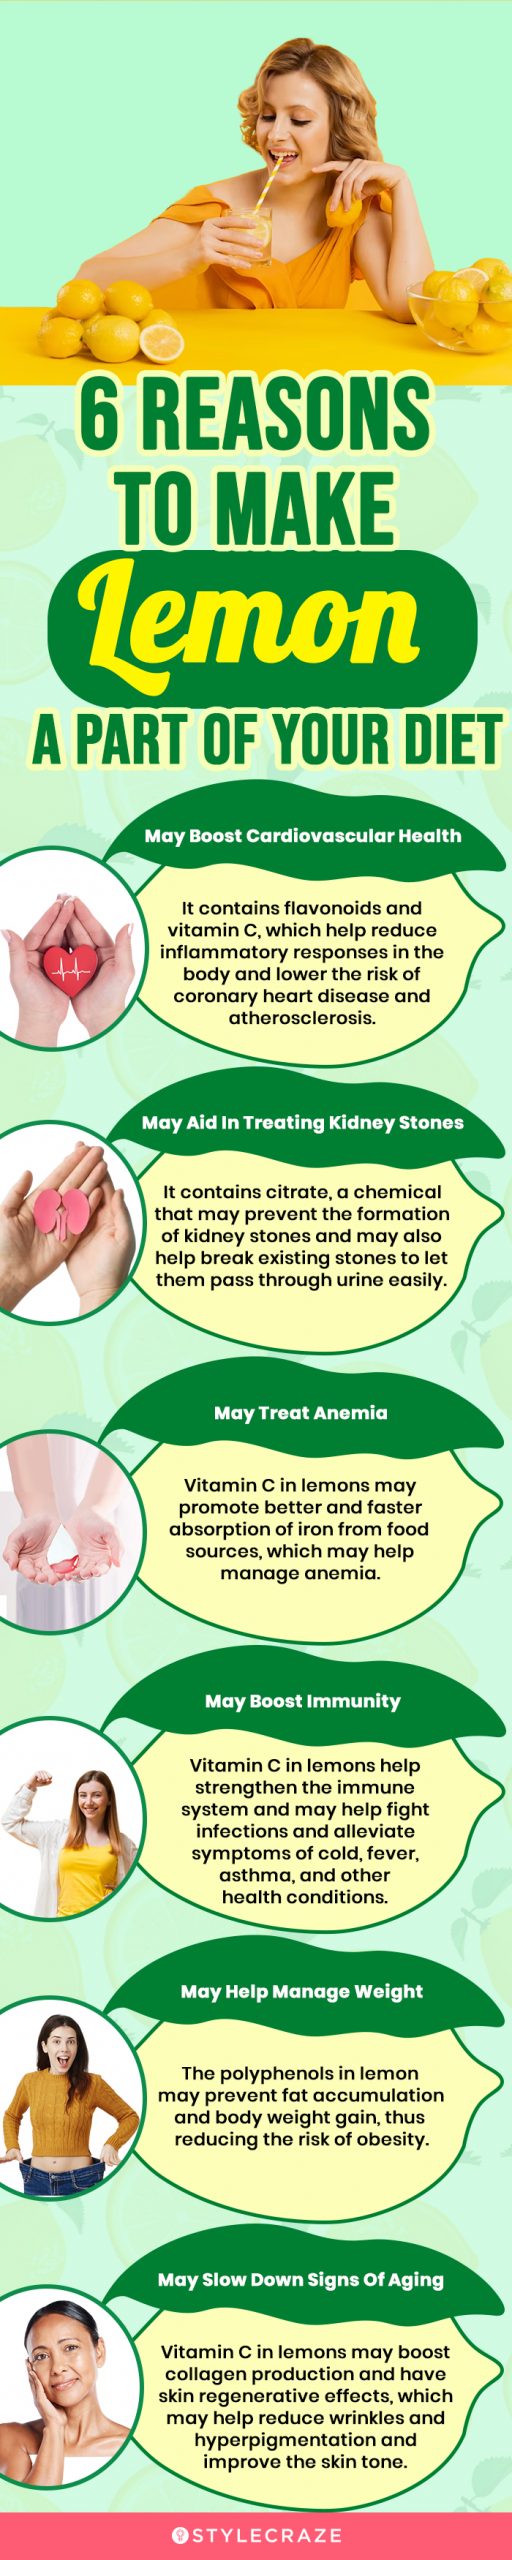 6 reasons to make lemon a part of your diet (infographic)